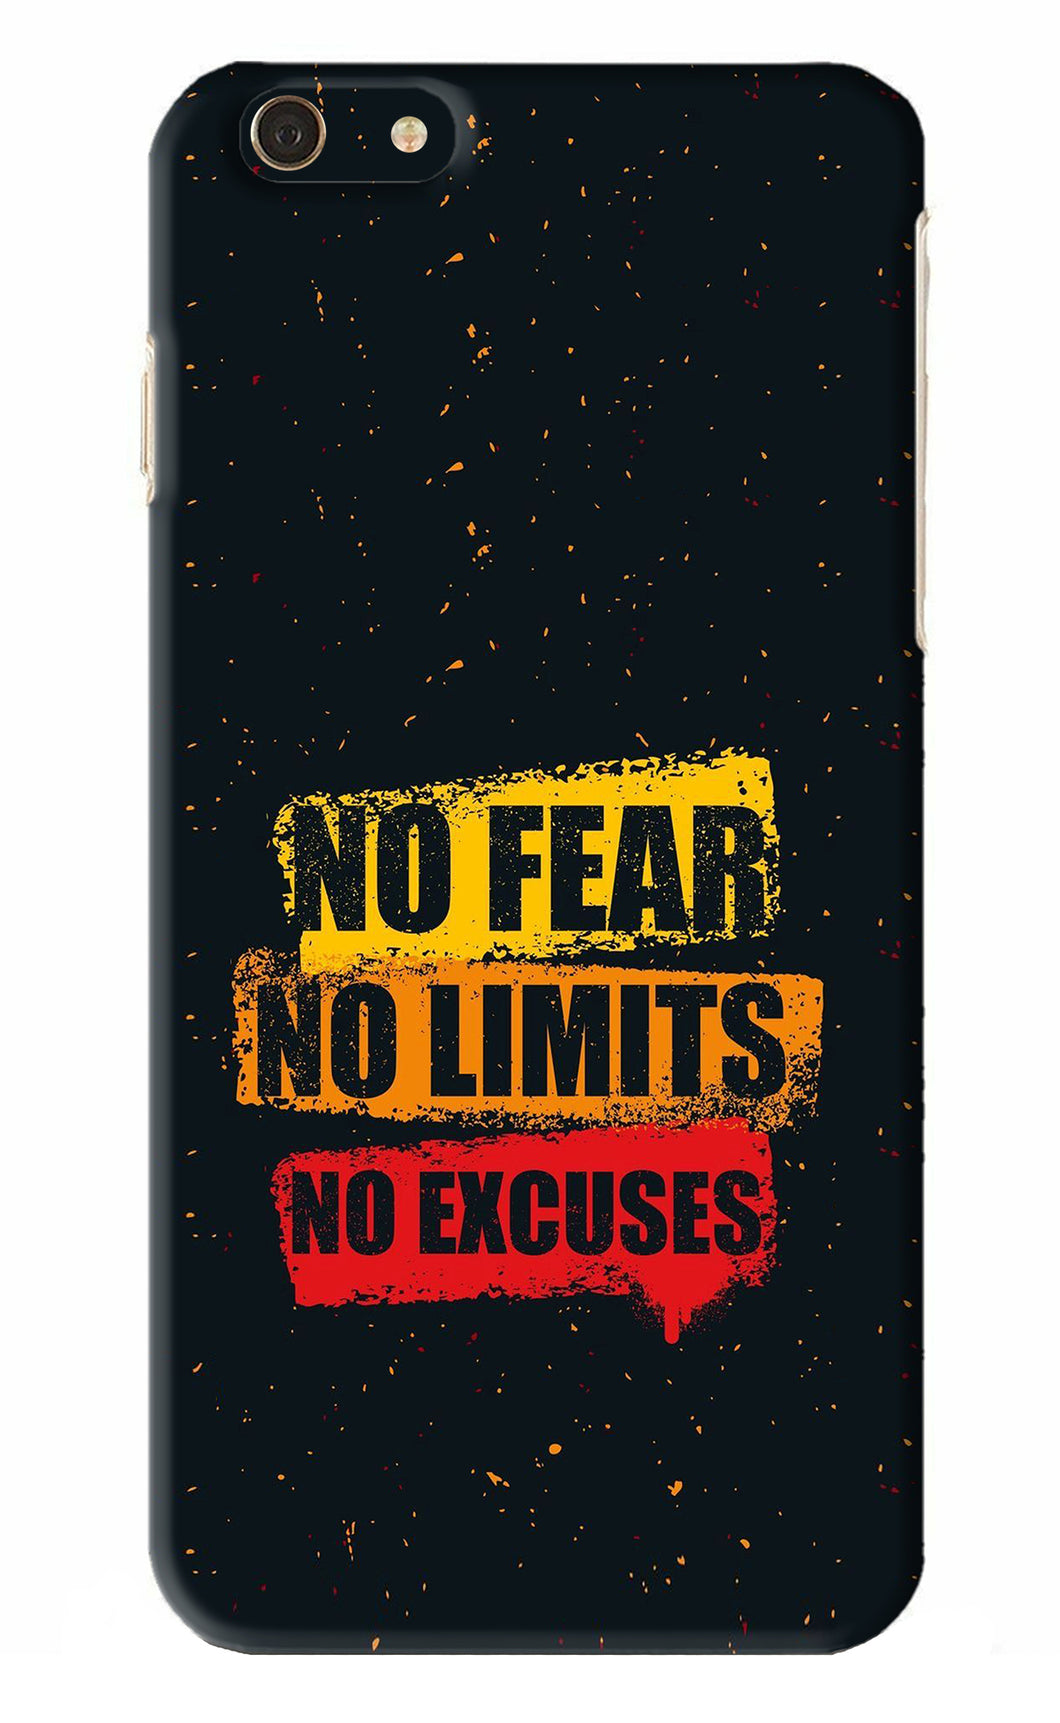 No Fear No Limits No Excuses iPhone 6 Plus Back Skin Wrap